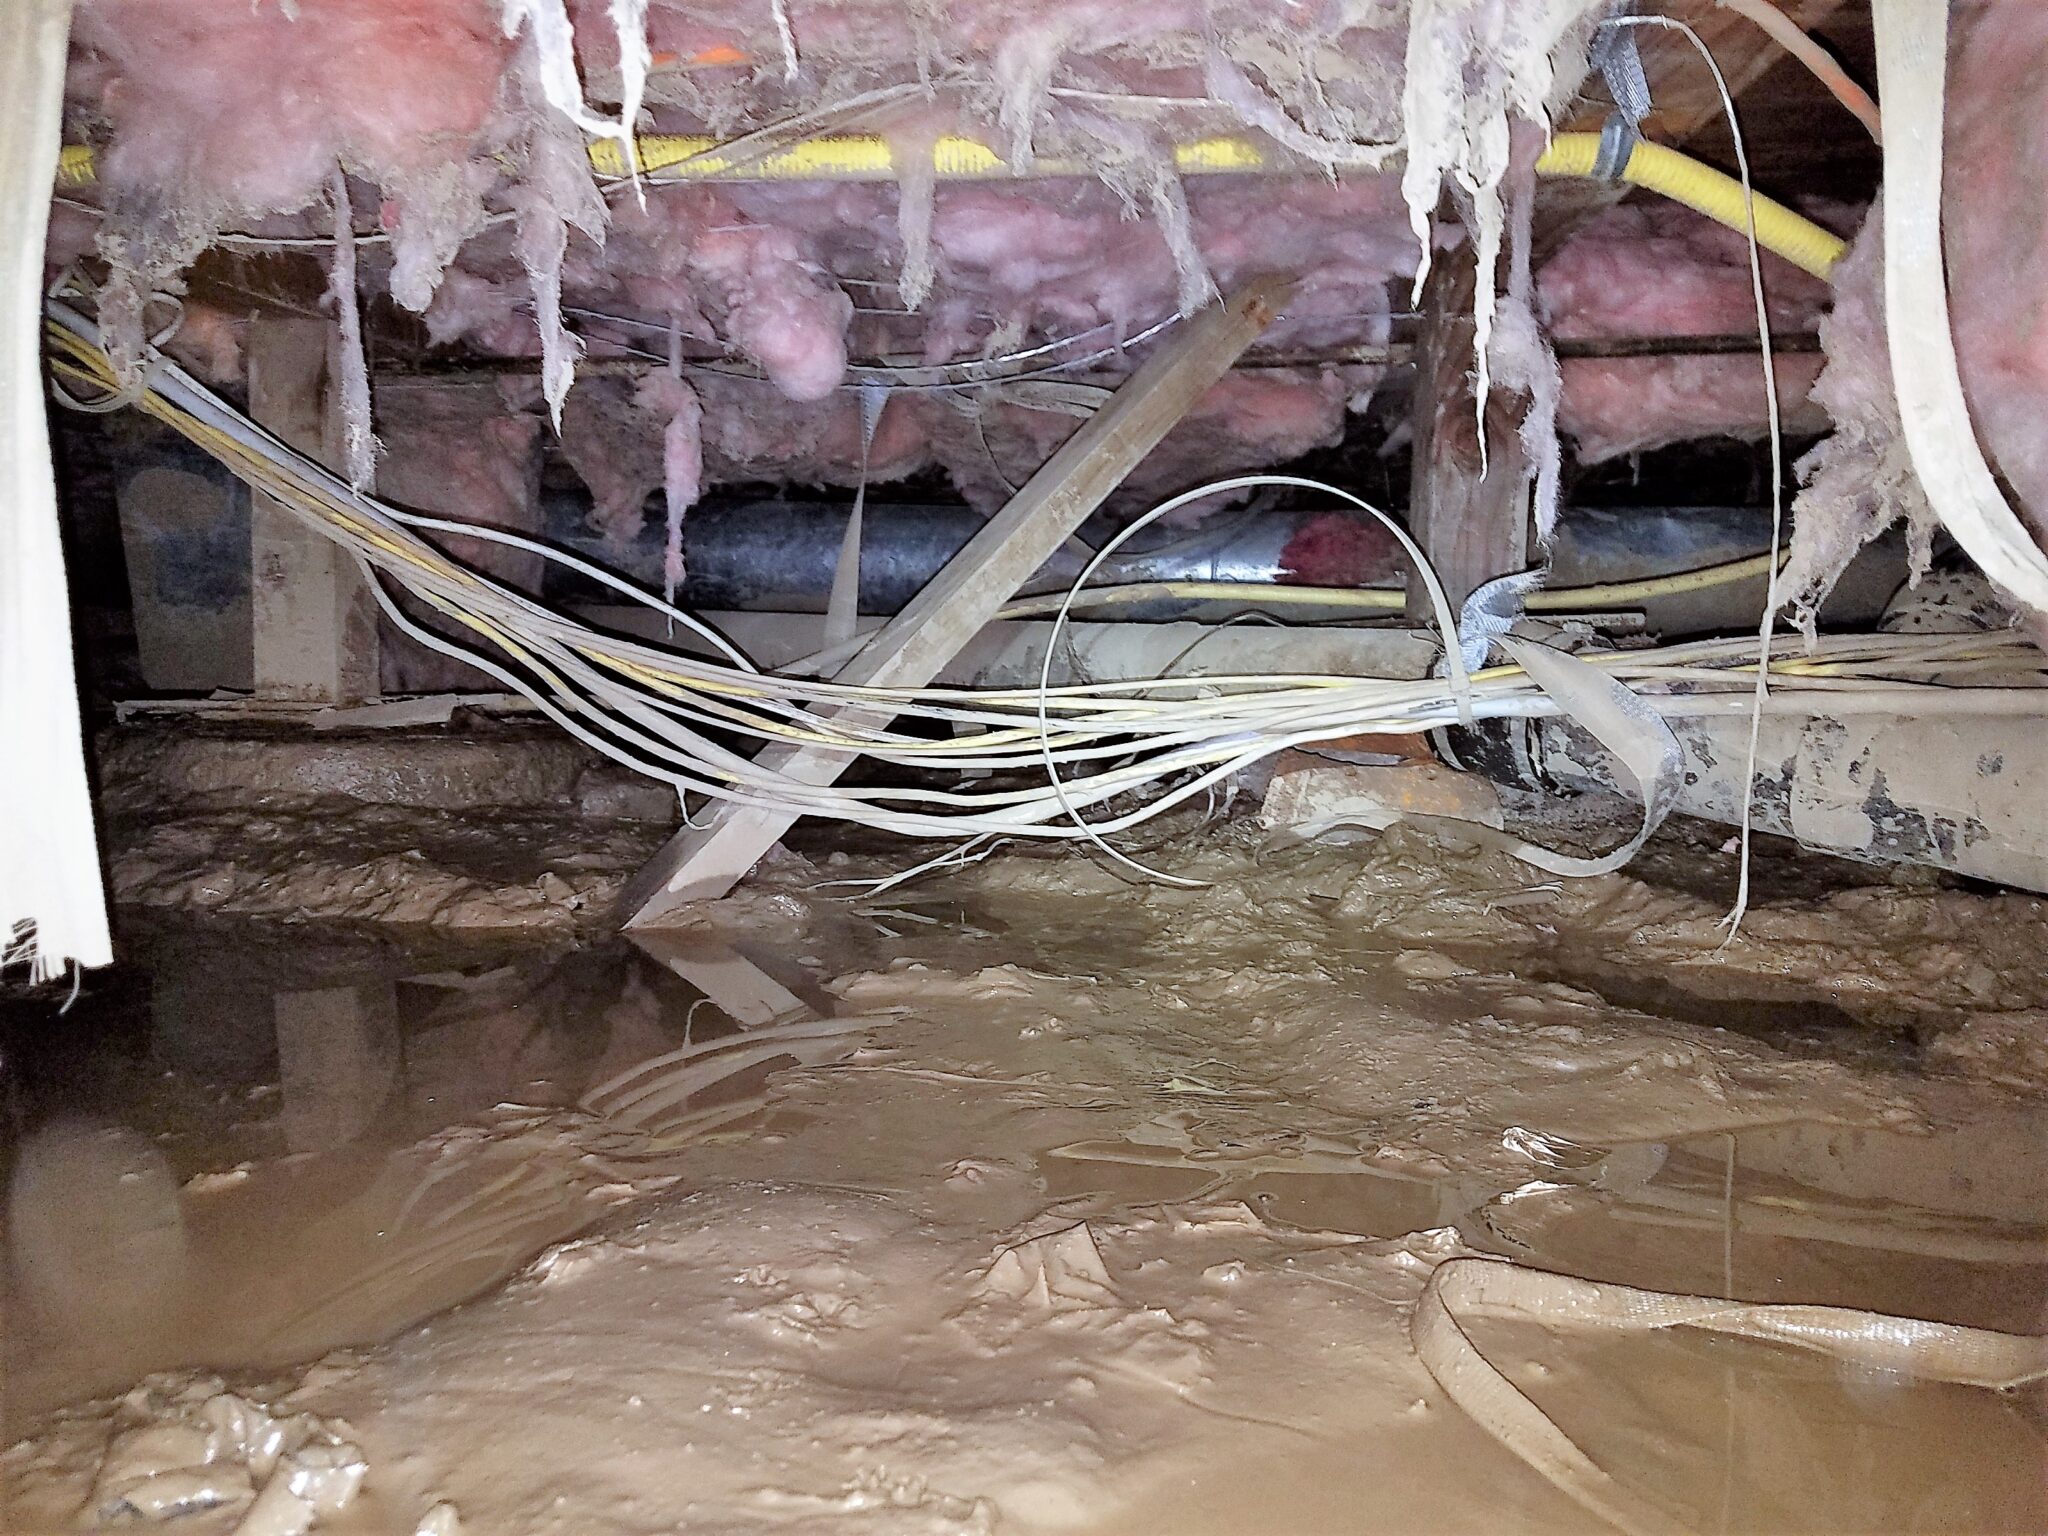 bloom crawl space services, bloom pest control, bloom home services